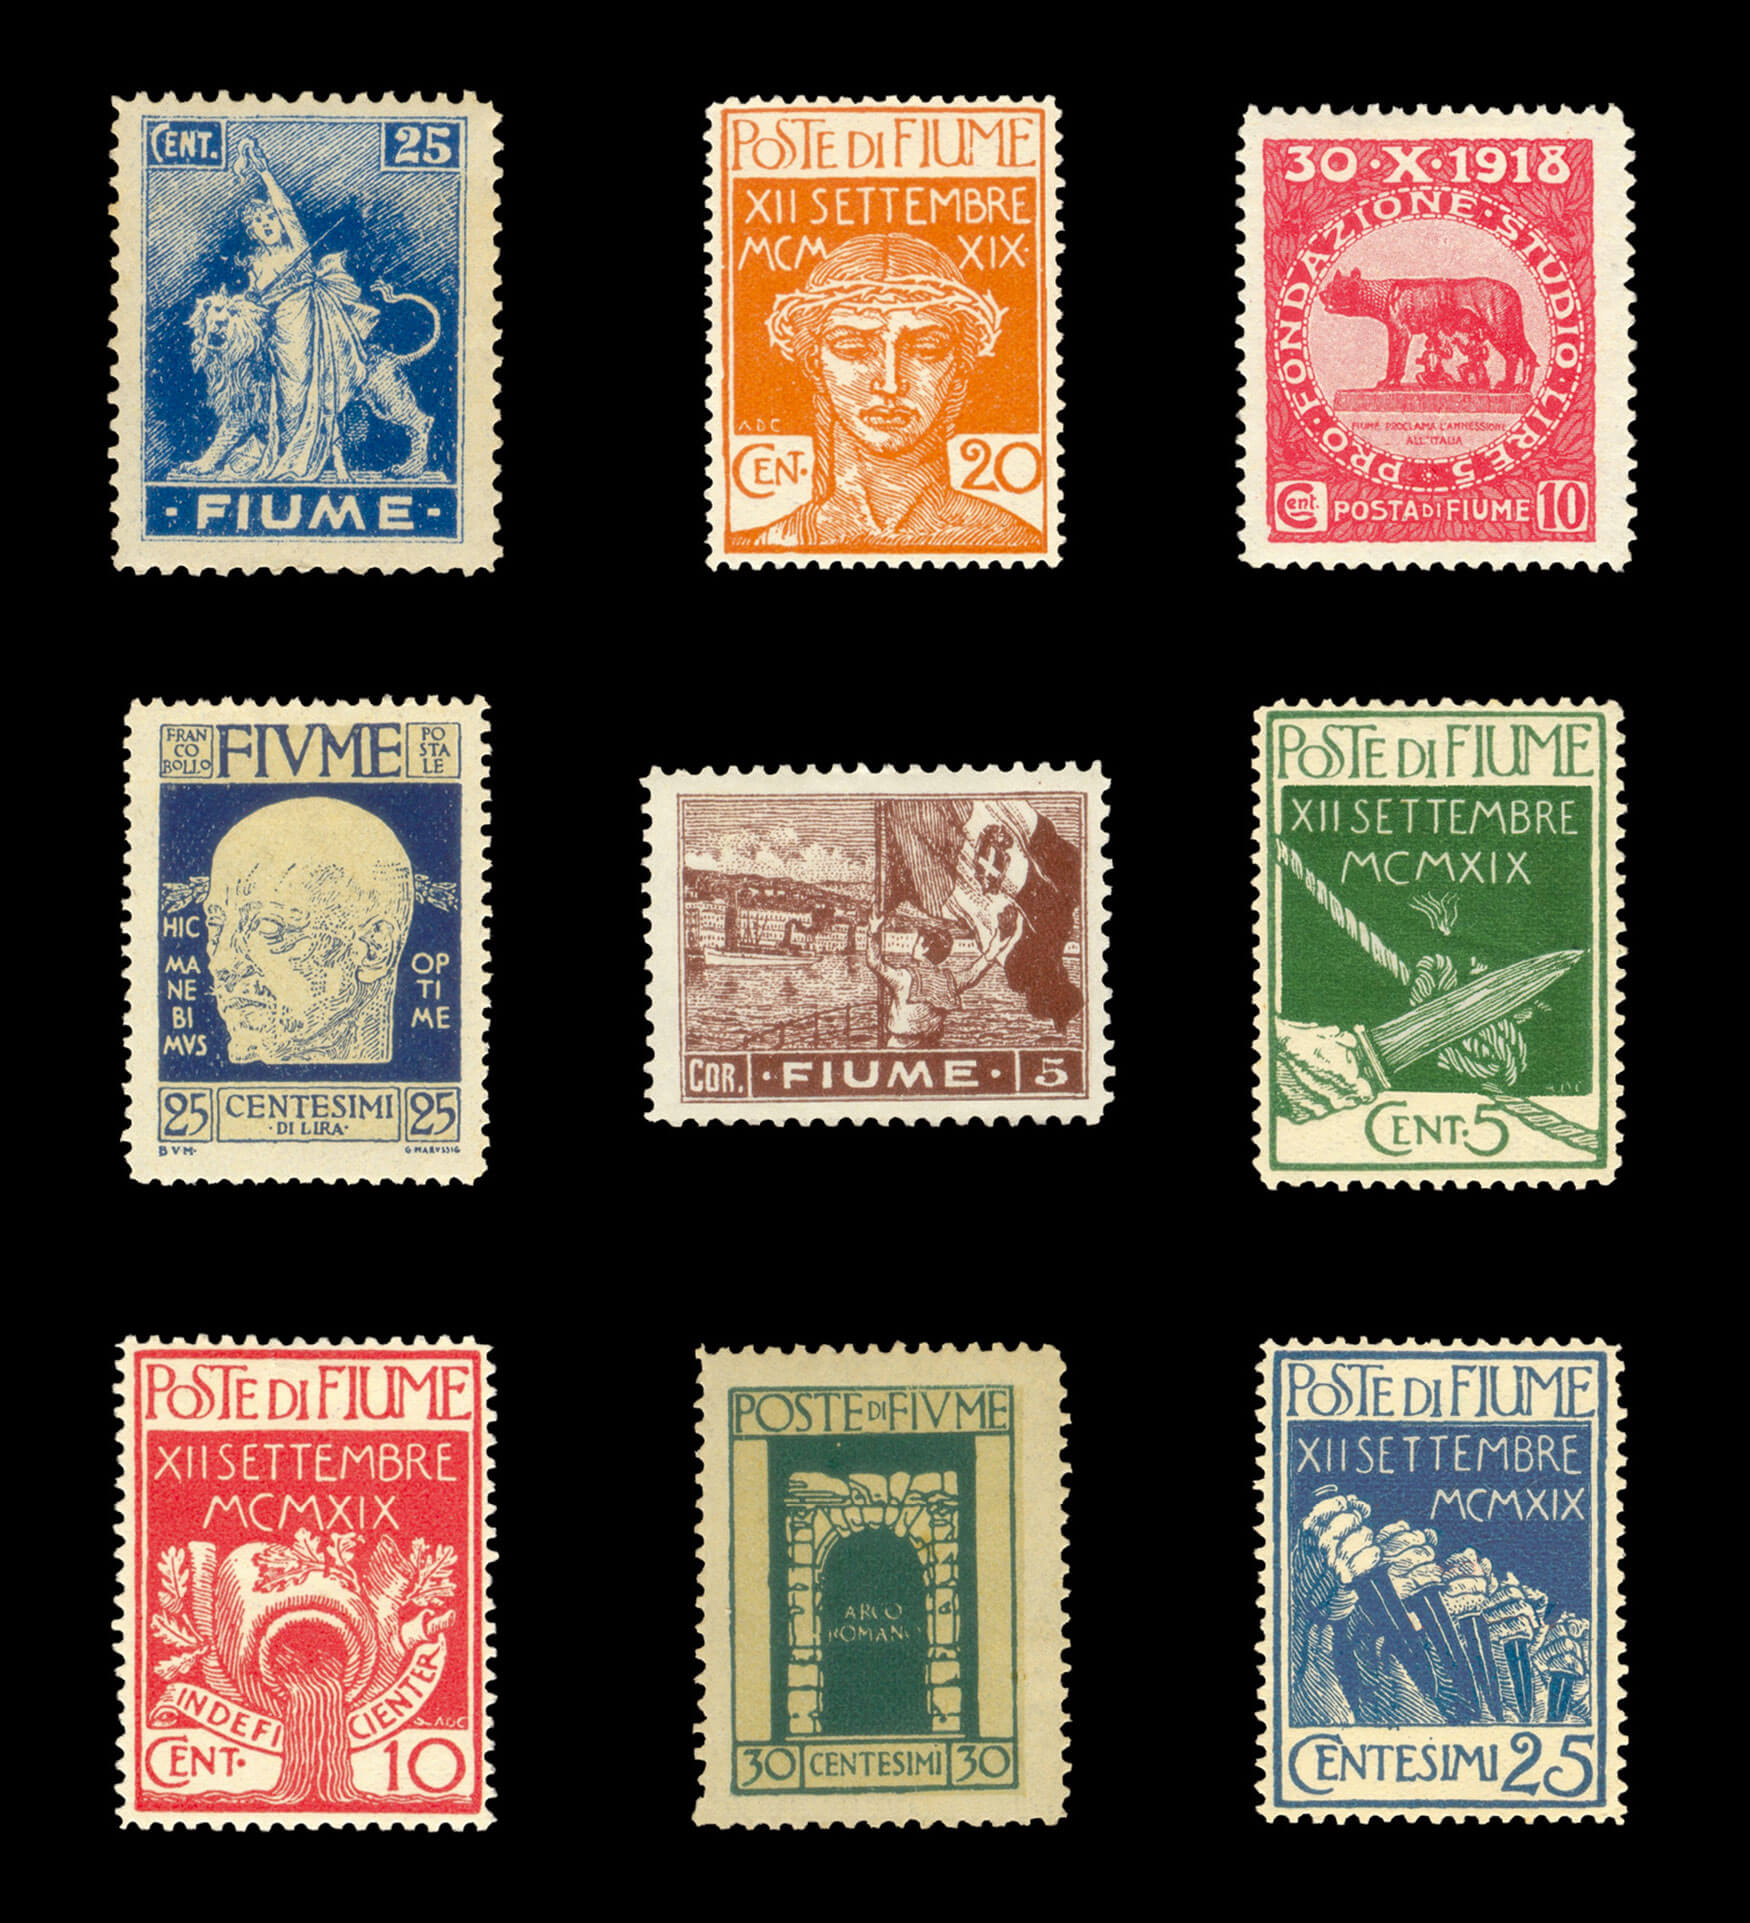 Nine Fiumean stamps issued during D’Annunzio’s occupation of the city. The stamps display a variety of symbols recalling the Roman empire and one features a portrait of D’Annunzio himself.